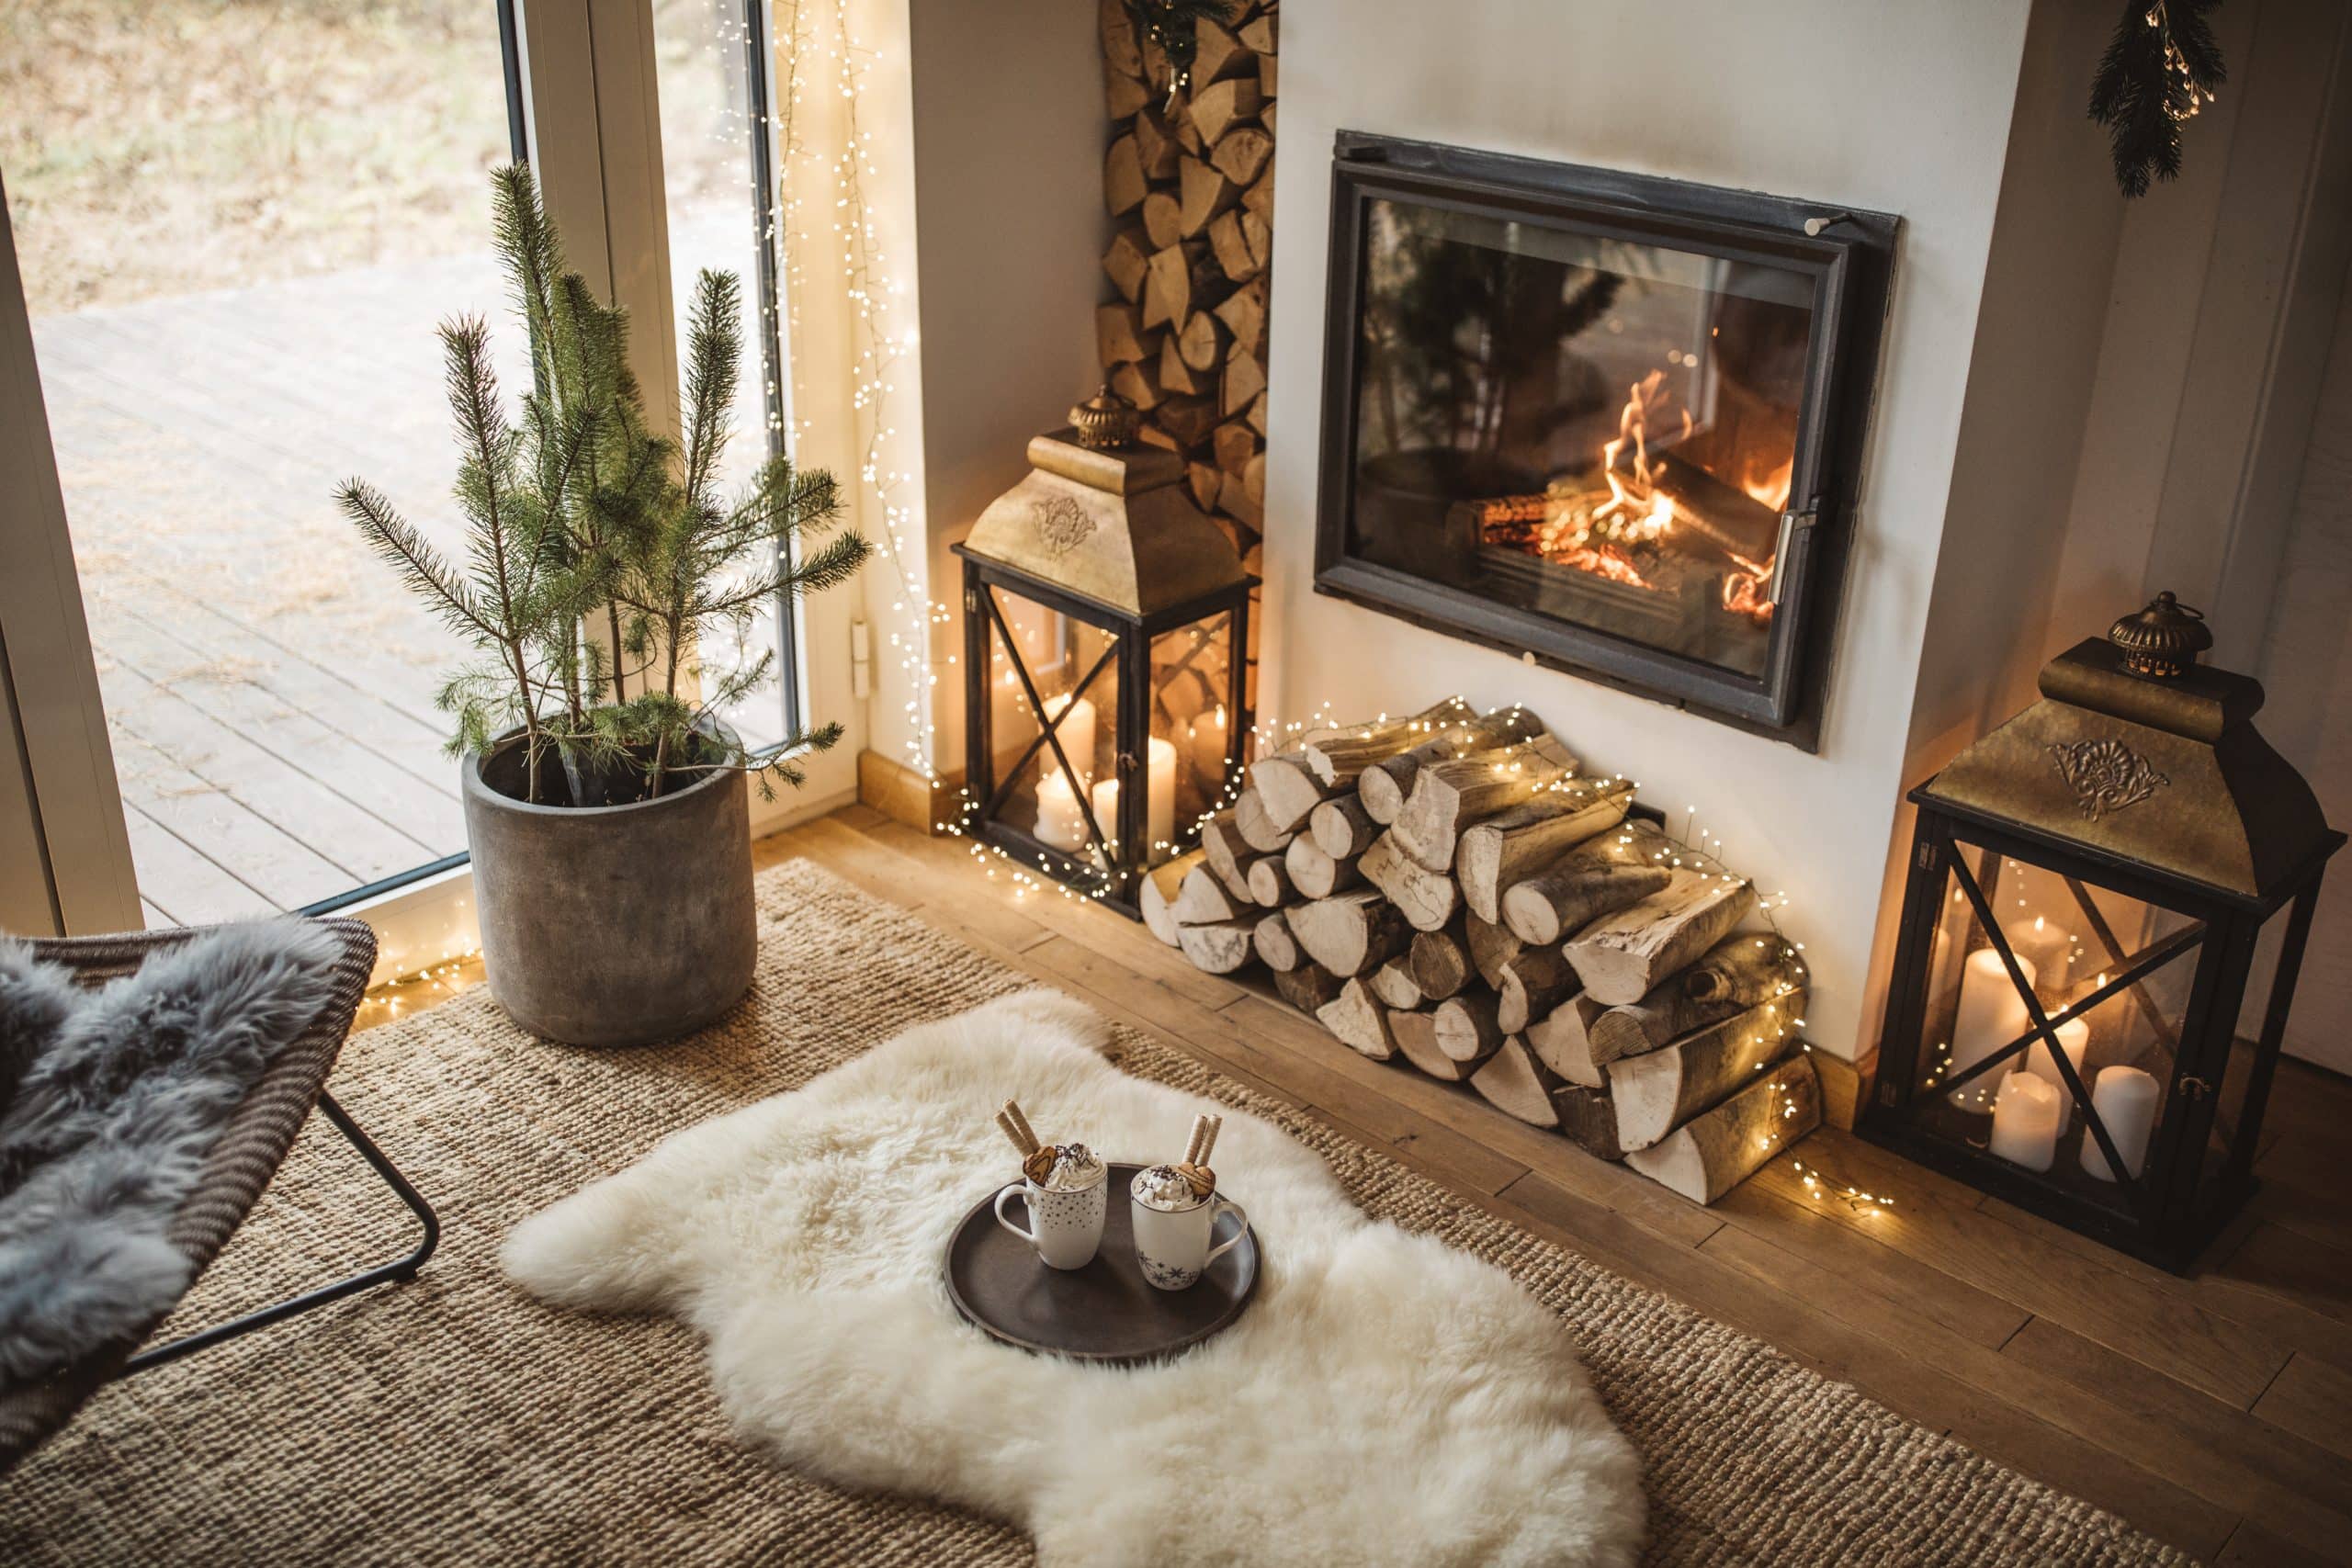 Cozy living room winter interior with gas fireplace, string lights, and mugs of hot chocolate.